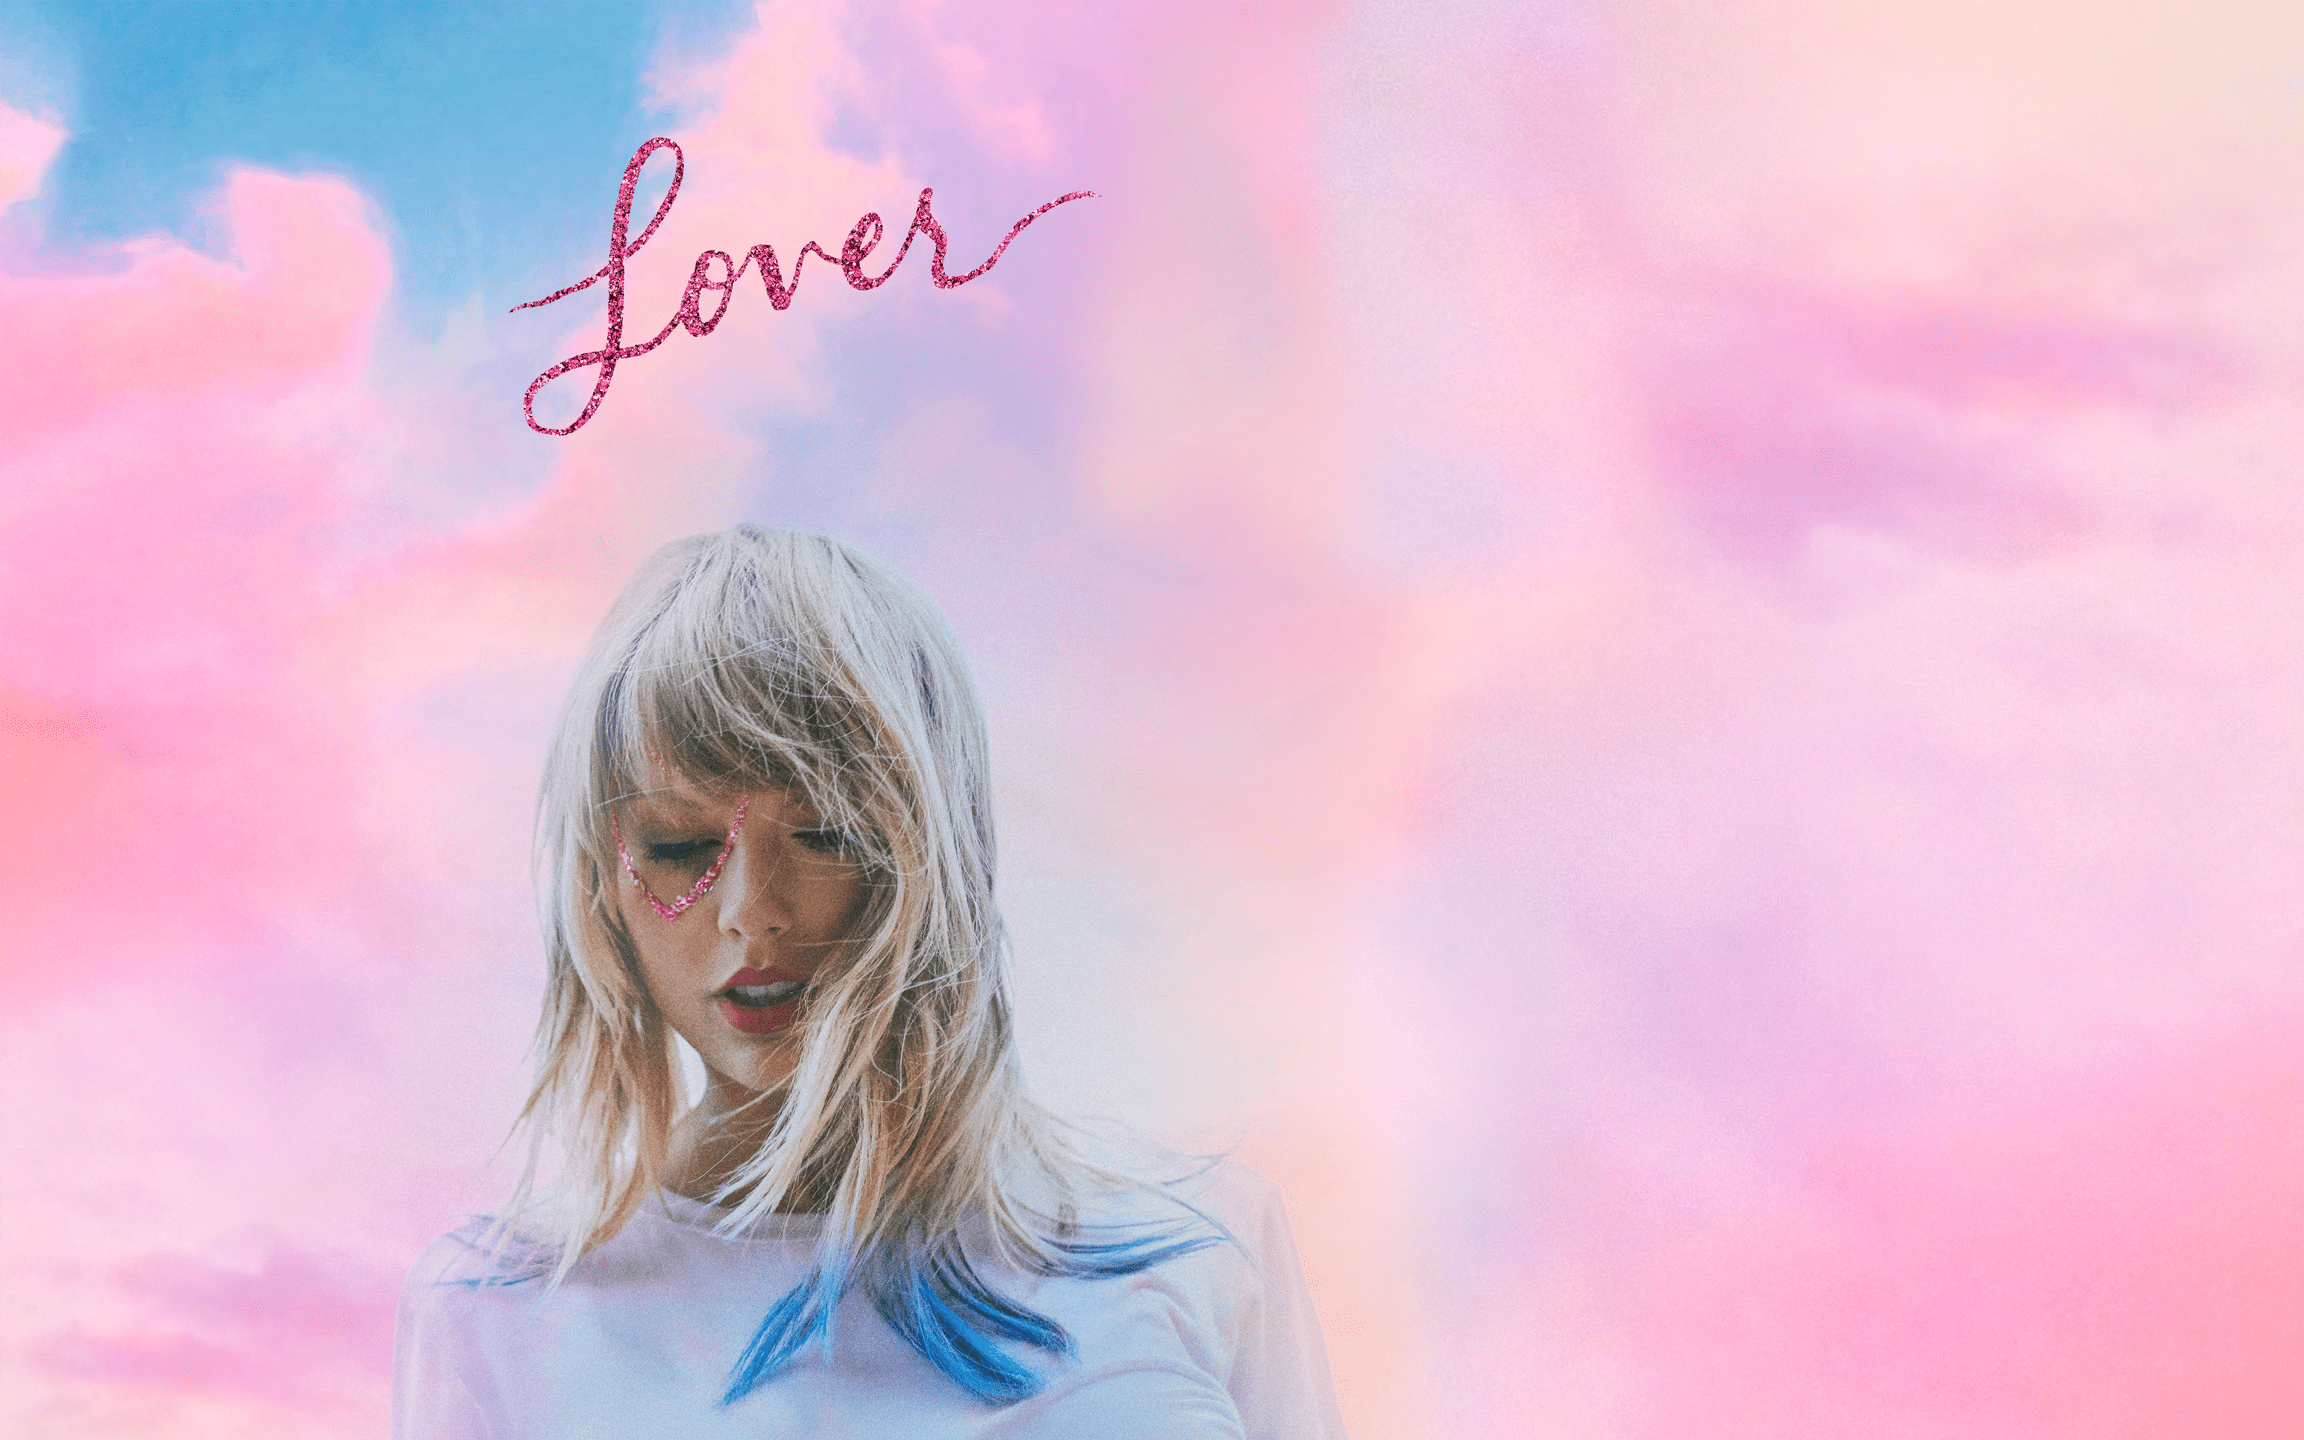 Taylor Swift Lover album cover with pink and blue clouds in the background. - Taylor Swift